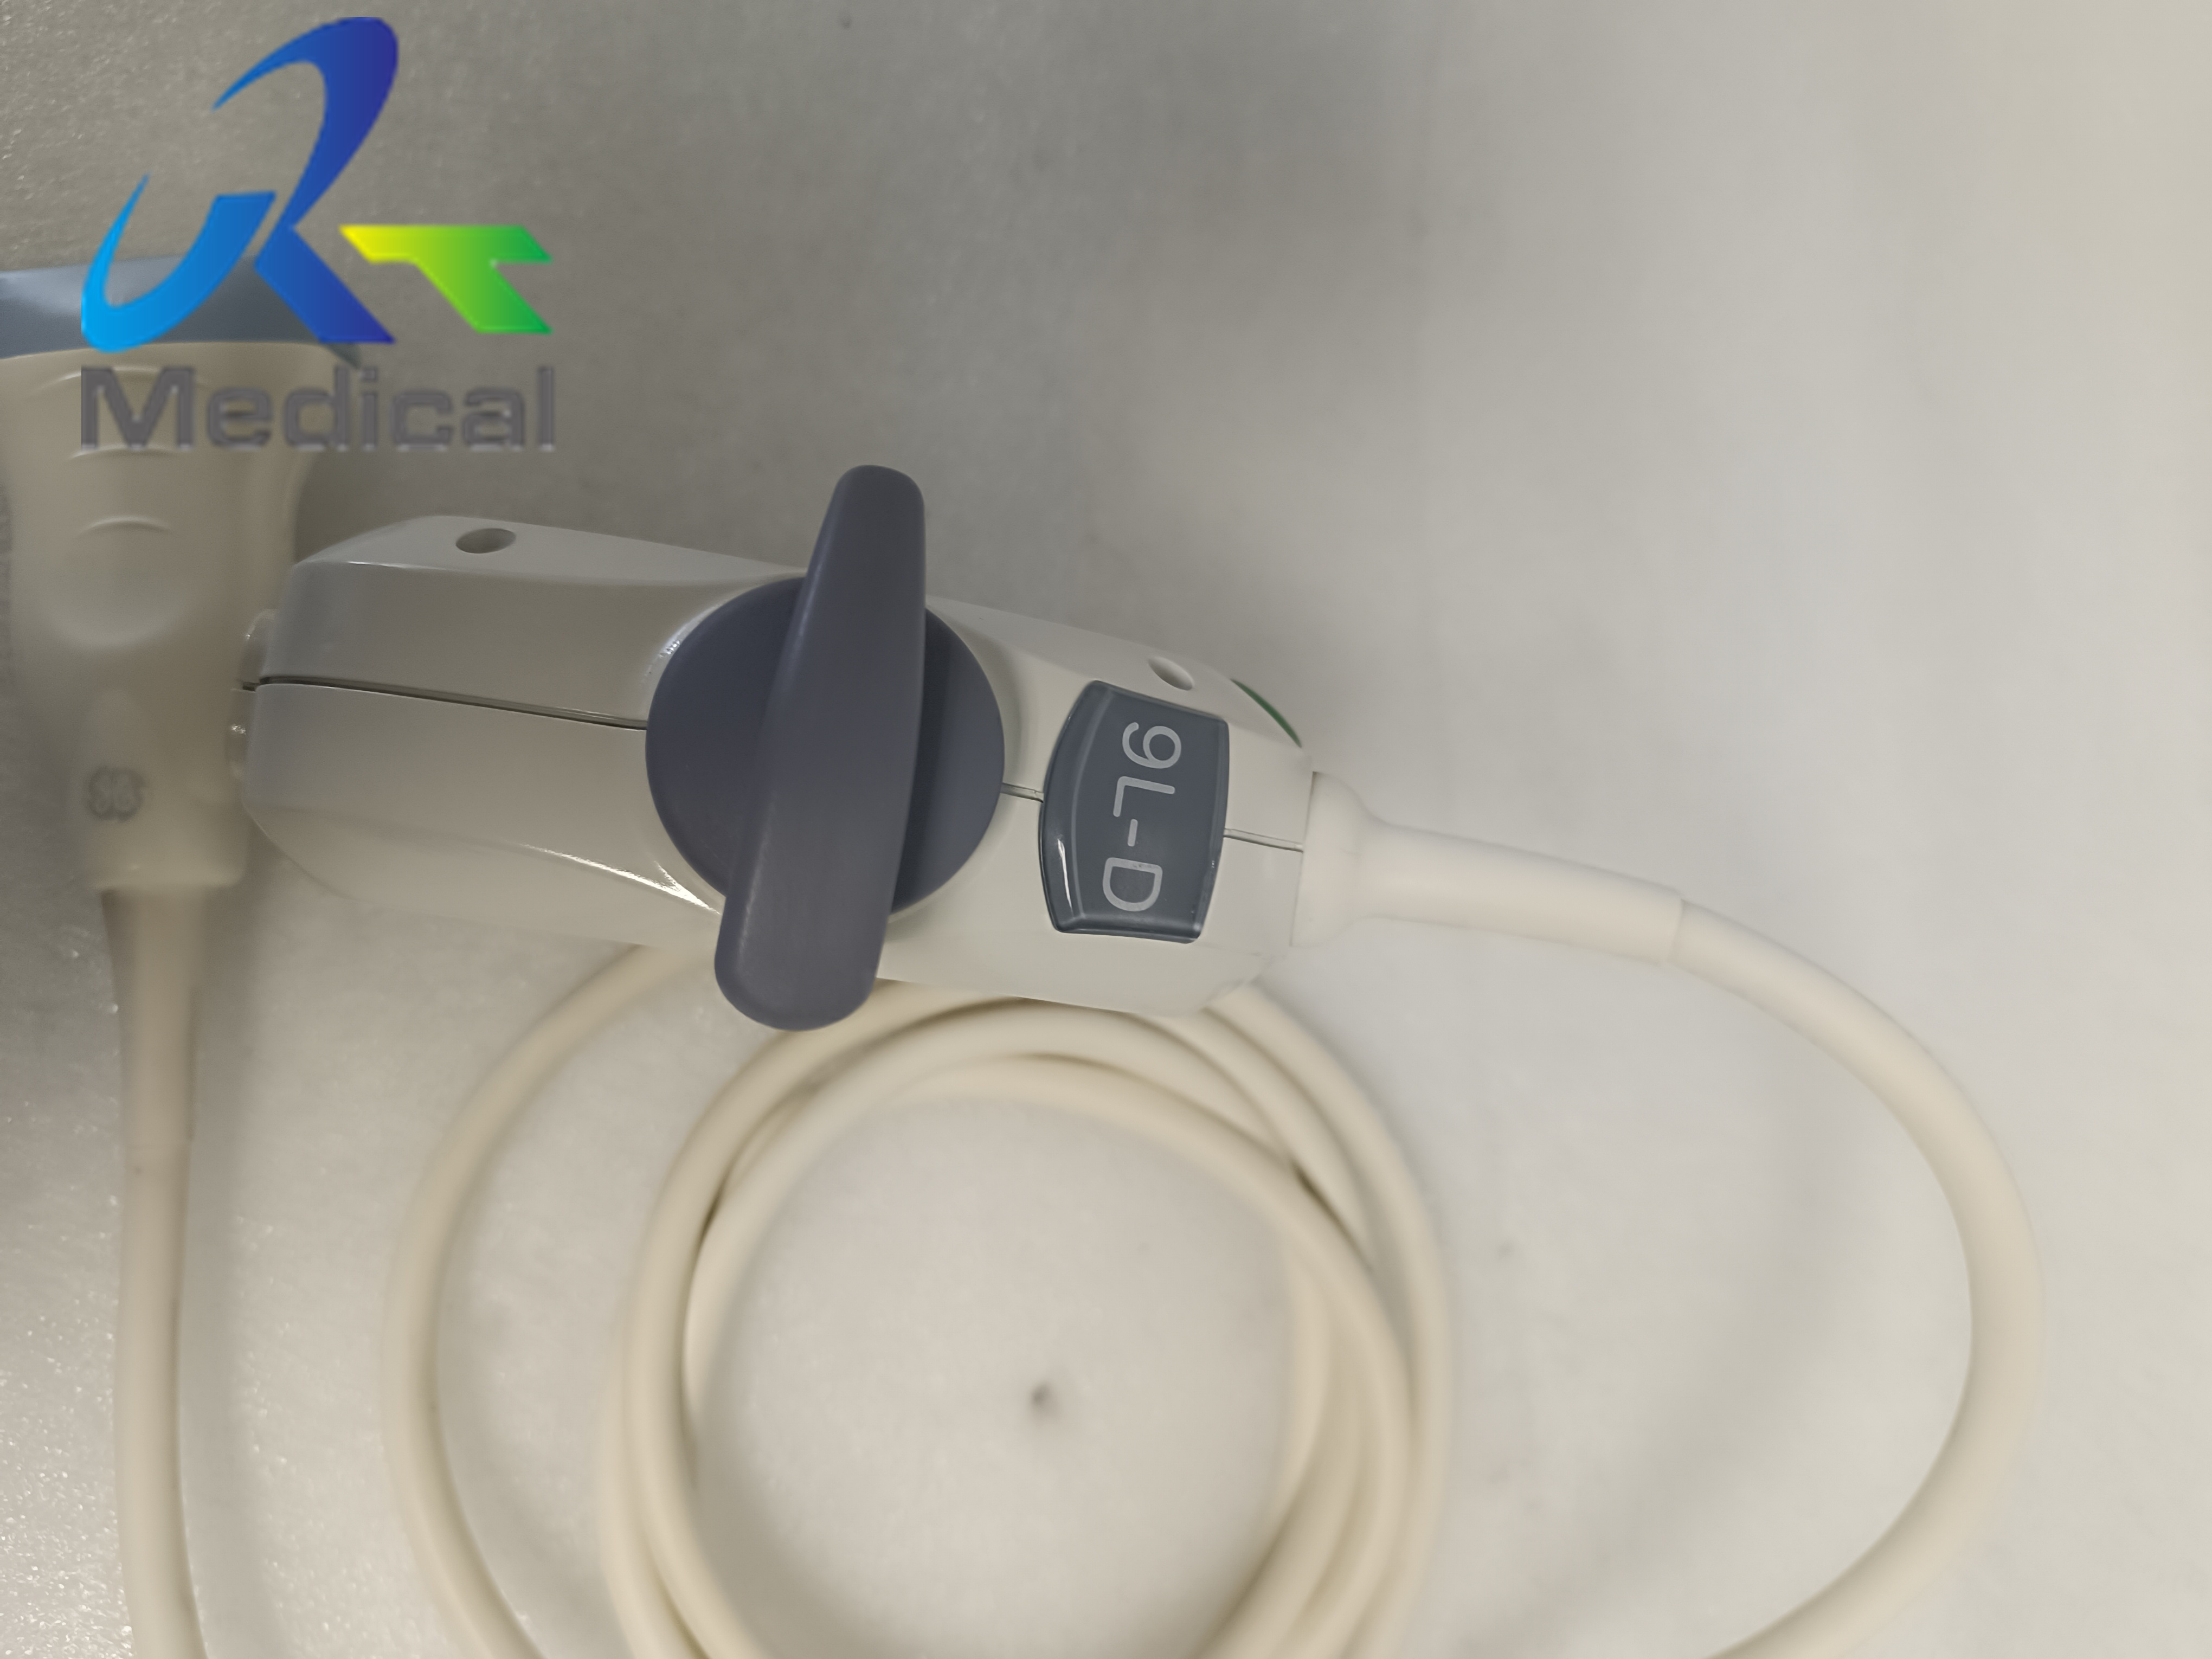 GE 9L-D Wide Band Linear Vascular Ultrasound Transducer 3.1-7.9MHz For Small Parts Peripheral Vascular